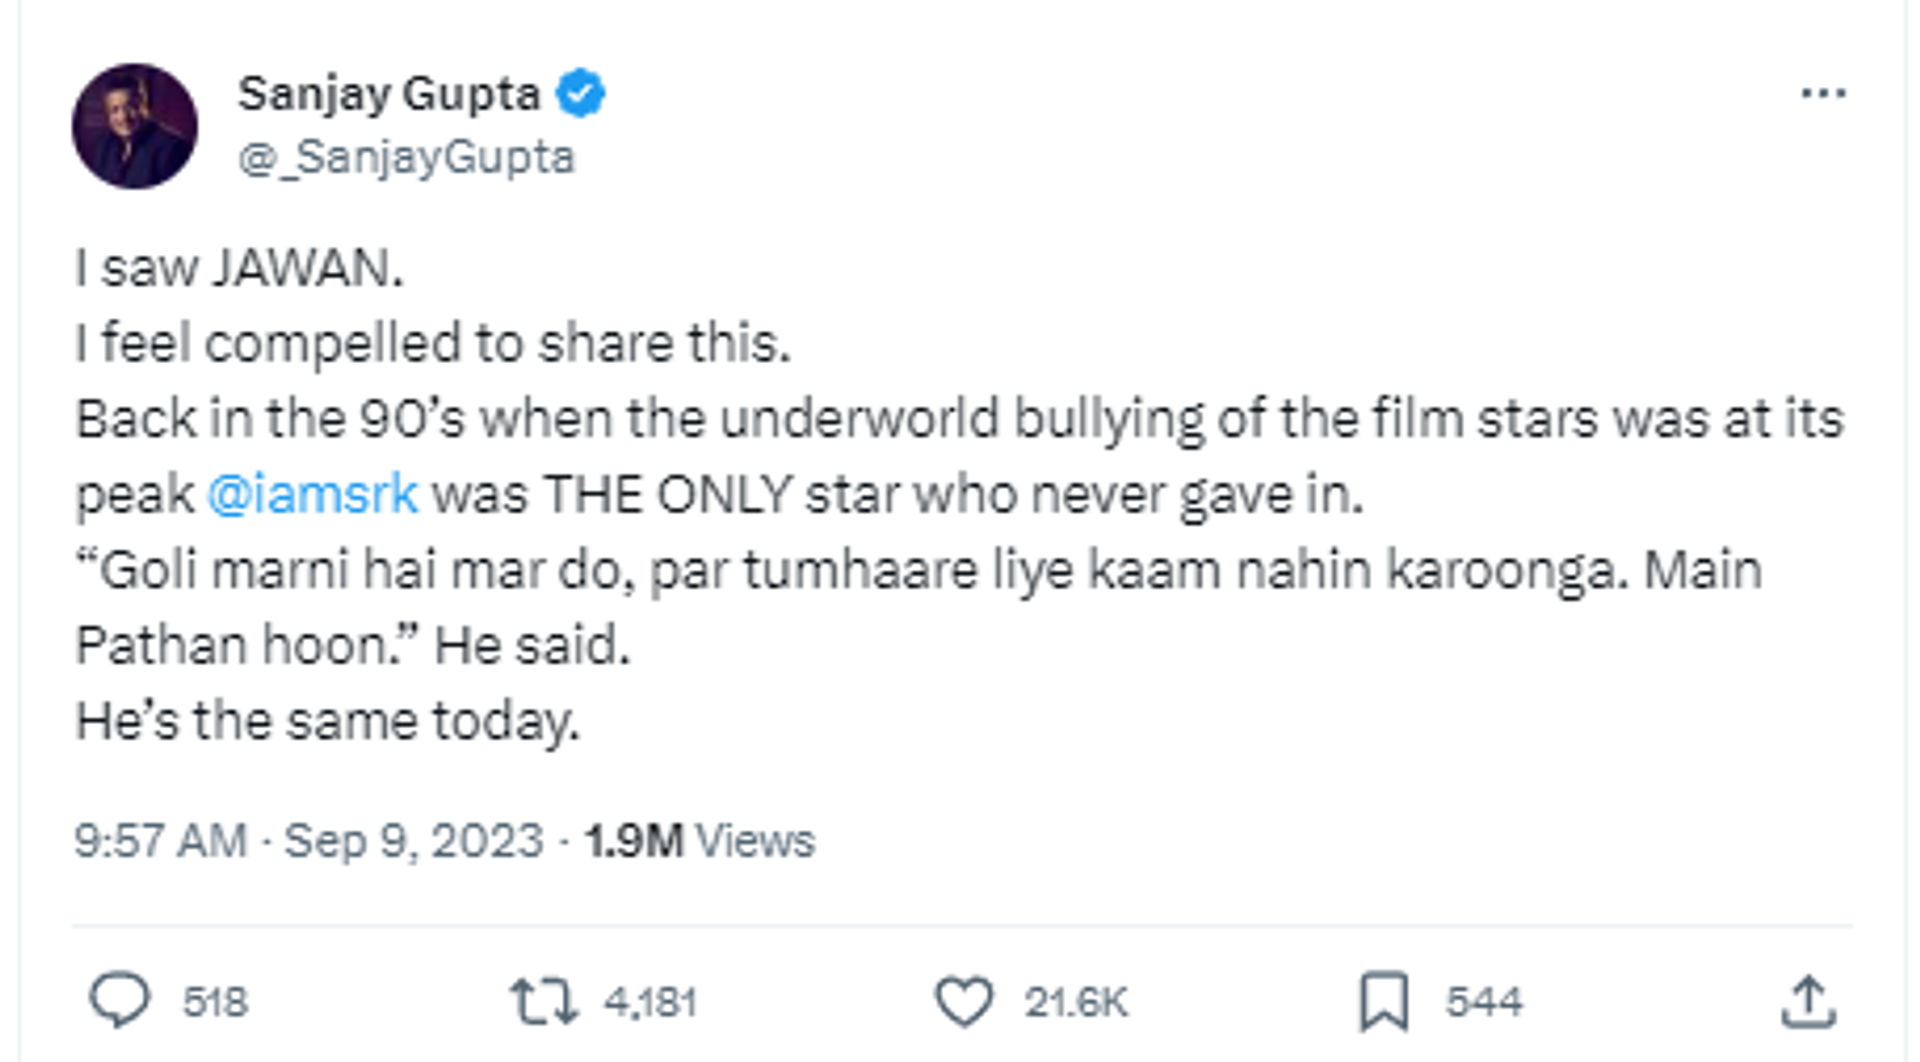 Bollywood Filmmaker Sanjay Gupta tweets about Shah Rukh Khan unwavering determination to fight back death threats from the gangsters. - Sputnik India, 1920, 09.10.2023